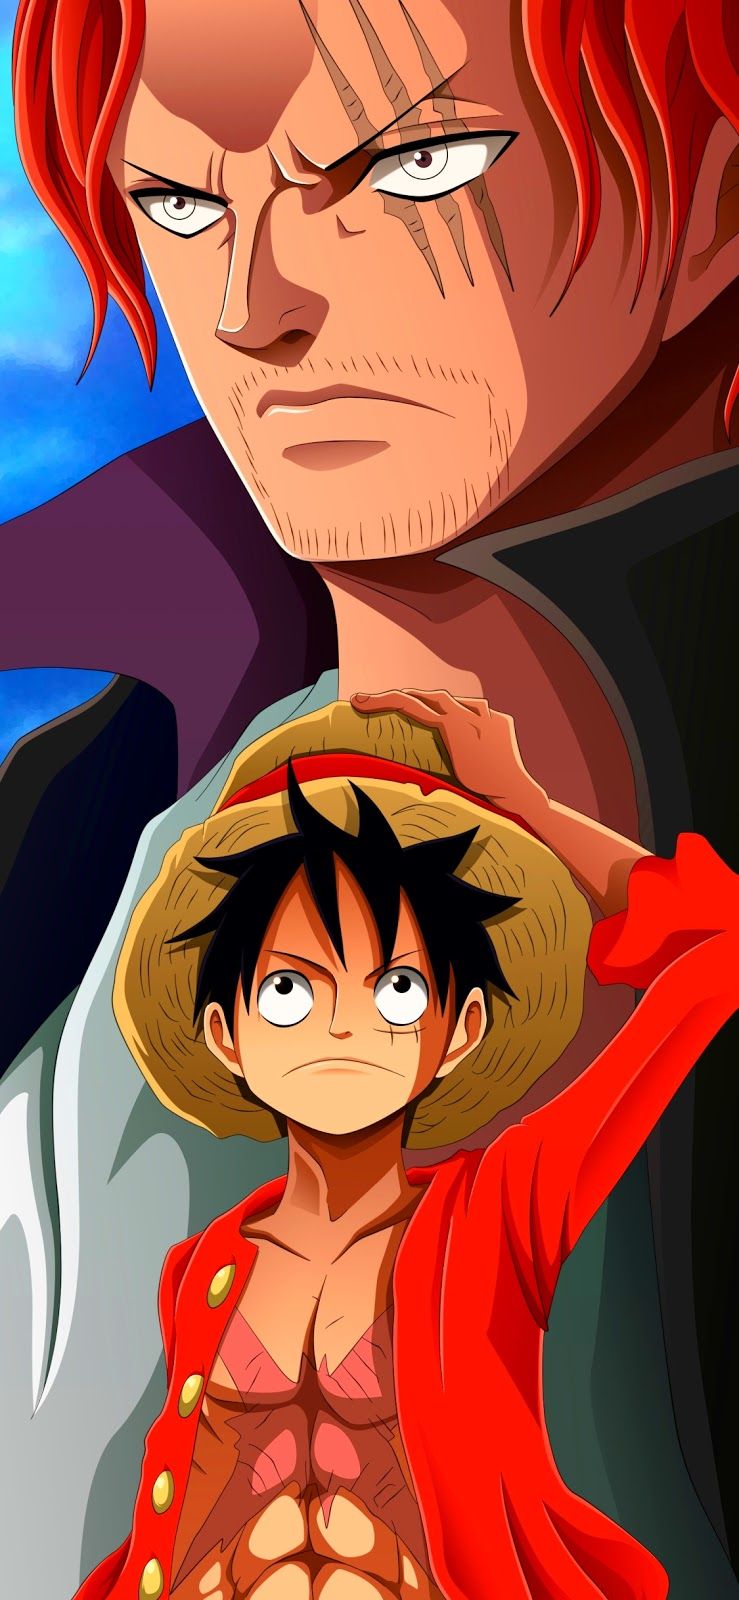 One Piece D.Luffy Mobile Wallpaper. One piece wallpaper iphone, Luffy, Monkey d luffy